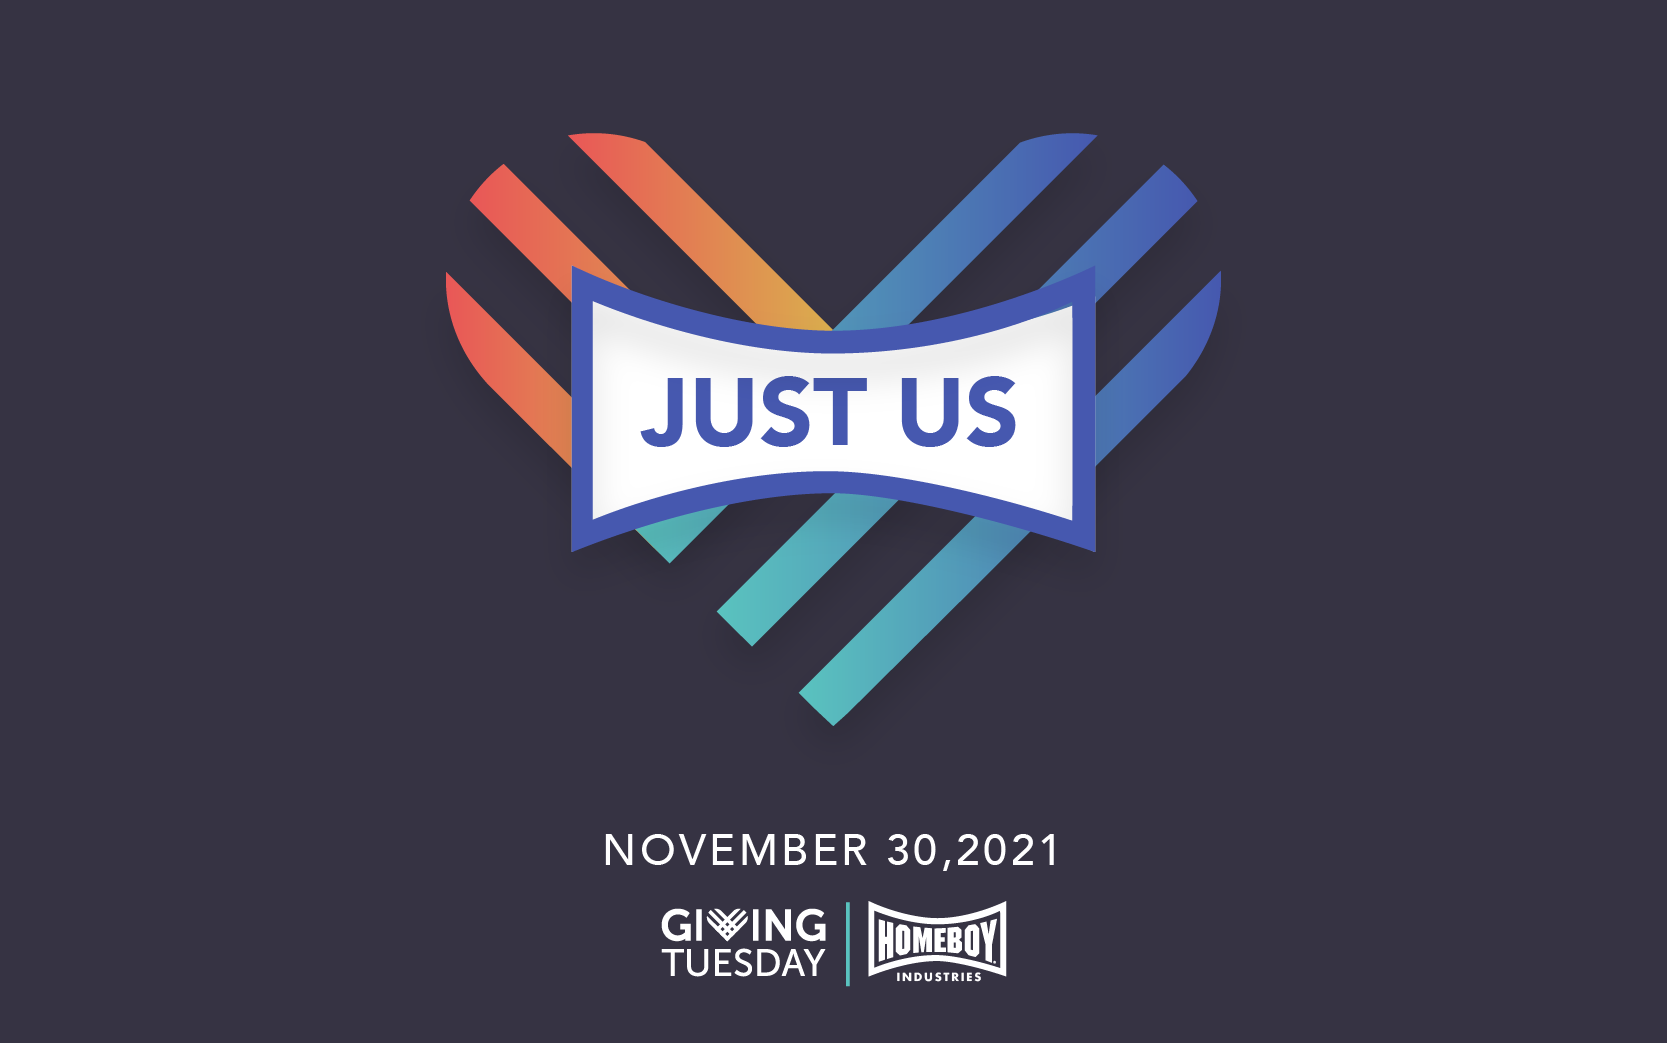 JUST US | SUPPORT HOMEBOY INDUSTRIES ON GIVING TUESDAY